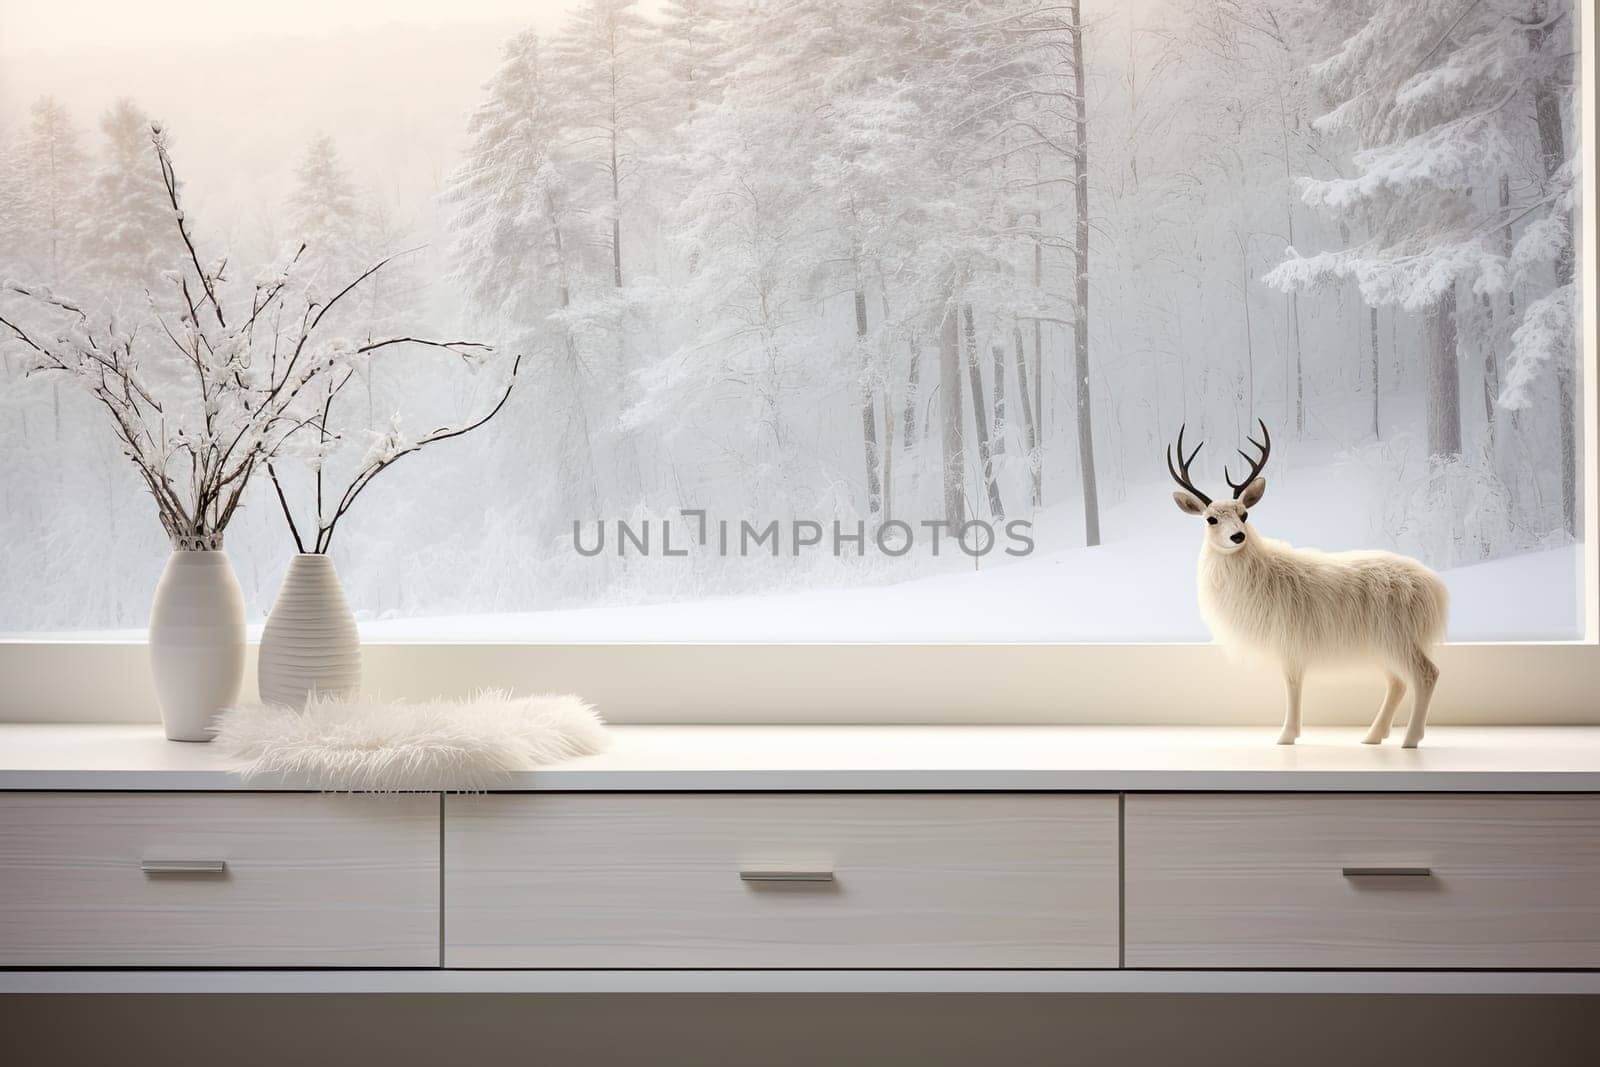 a white deer standing in front of a window with snow on the windowsills and trees outside behind it